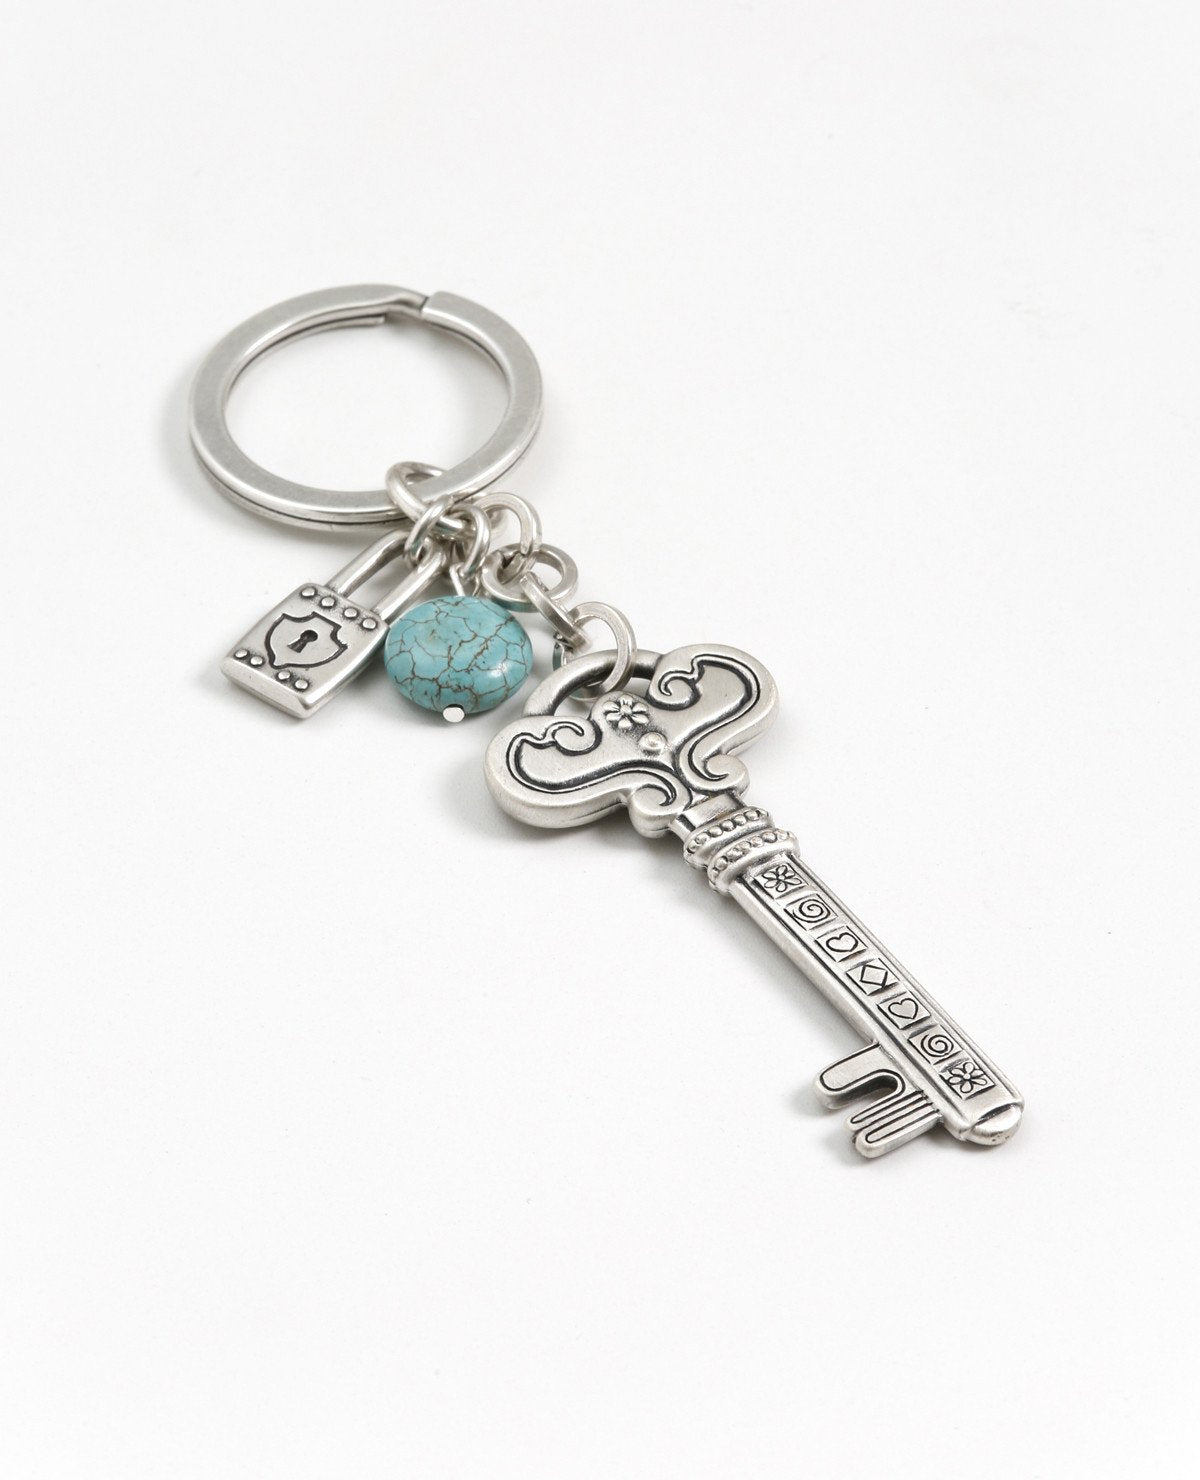 This keychain opens the door to success! A double sided key, which on one side has the words "your key to success" inscribed, and the other side is decorated with rich motifs and noble embossments. The tip of the key is attached to a linked chain which has a small lock and a beautiful turquoise stone hanging from it. The keychain is coated in sterling silver and is strong and reliable. A gift for those with a taste for the finer things, which you wish to remind that any lock in their life can be opened by t